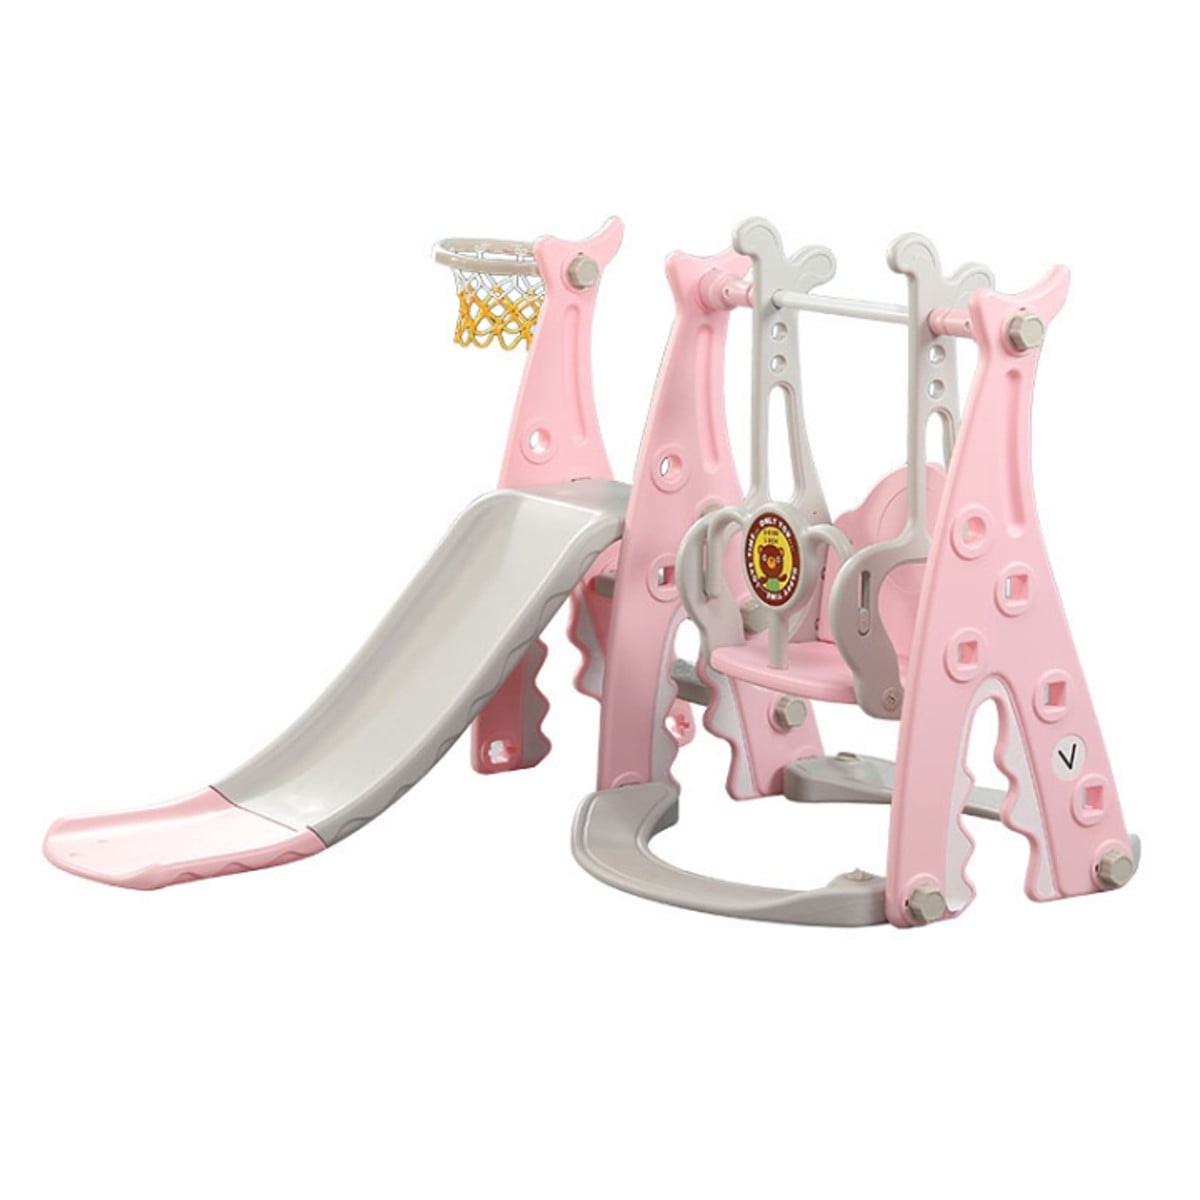 baby outdoor play gym